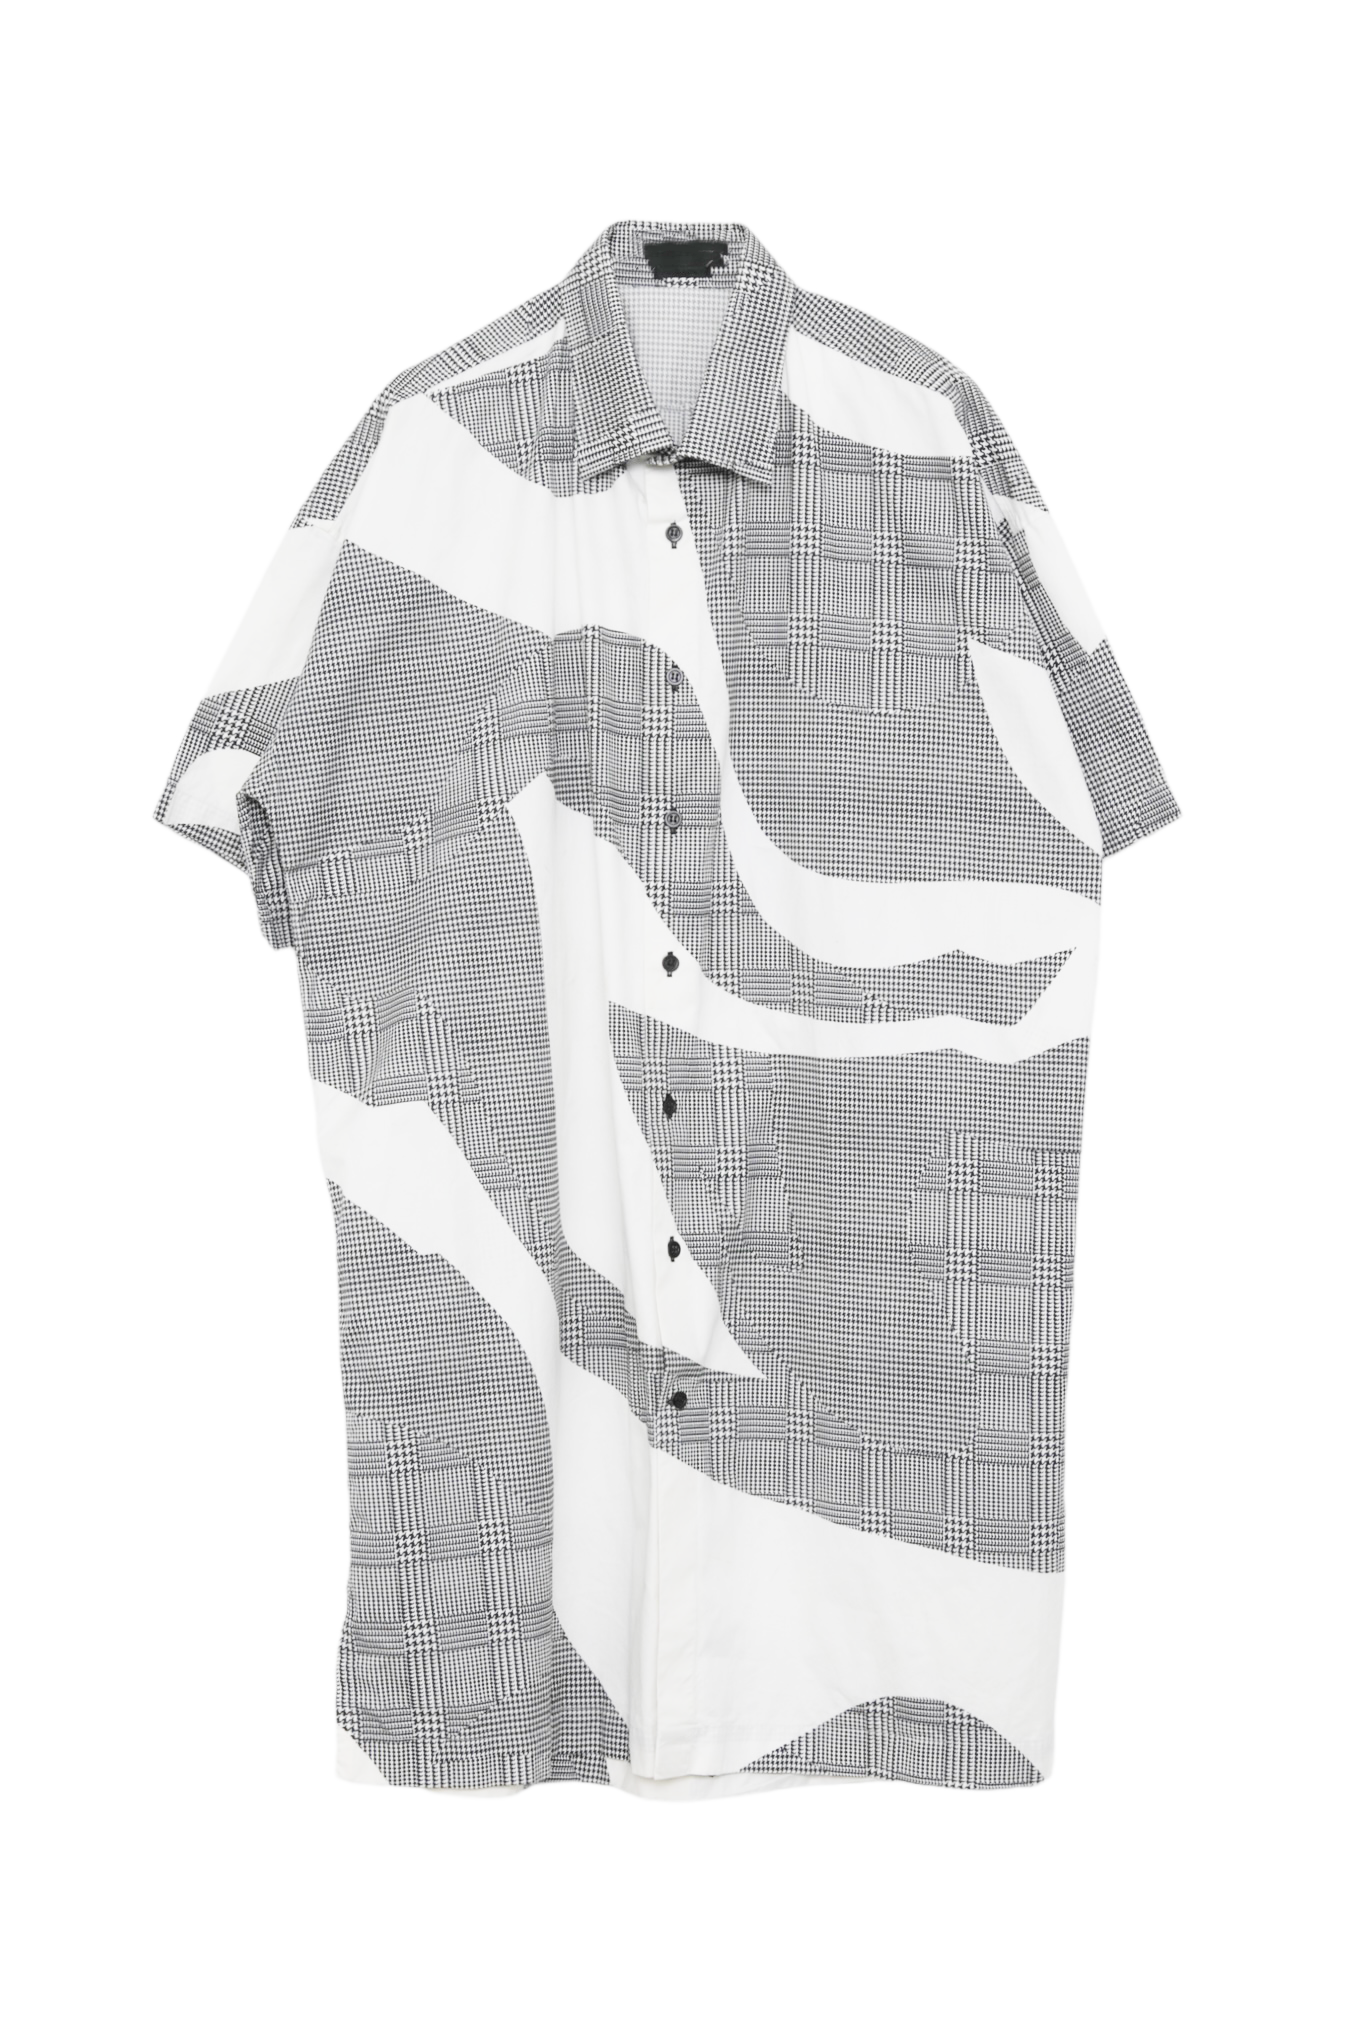 Alexander McQUEEN CRAZY PATTERNED OVER SIZED SHIRT